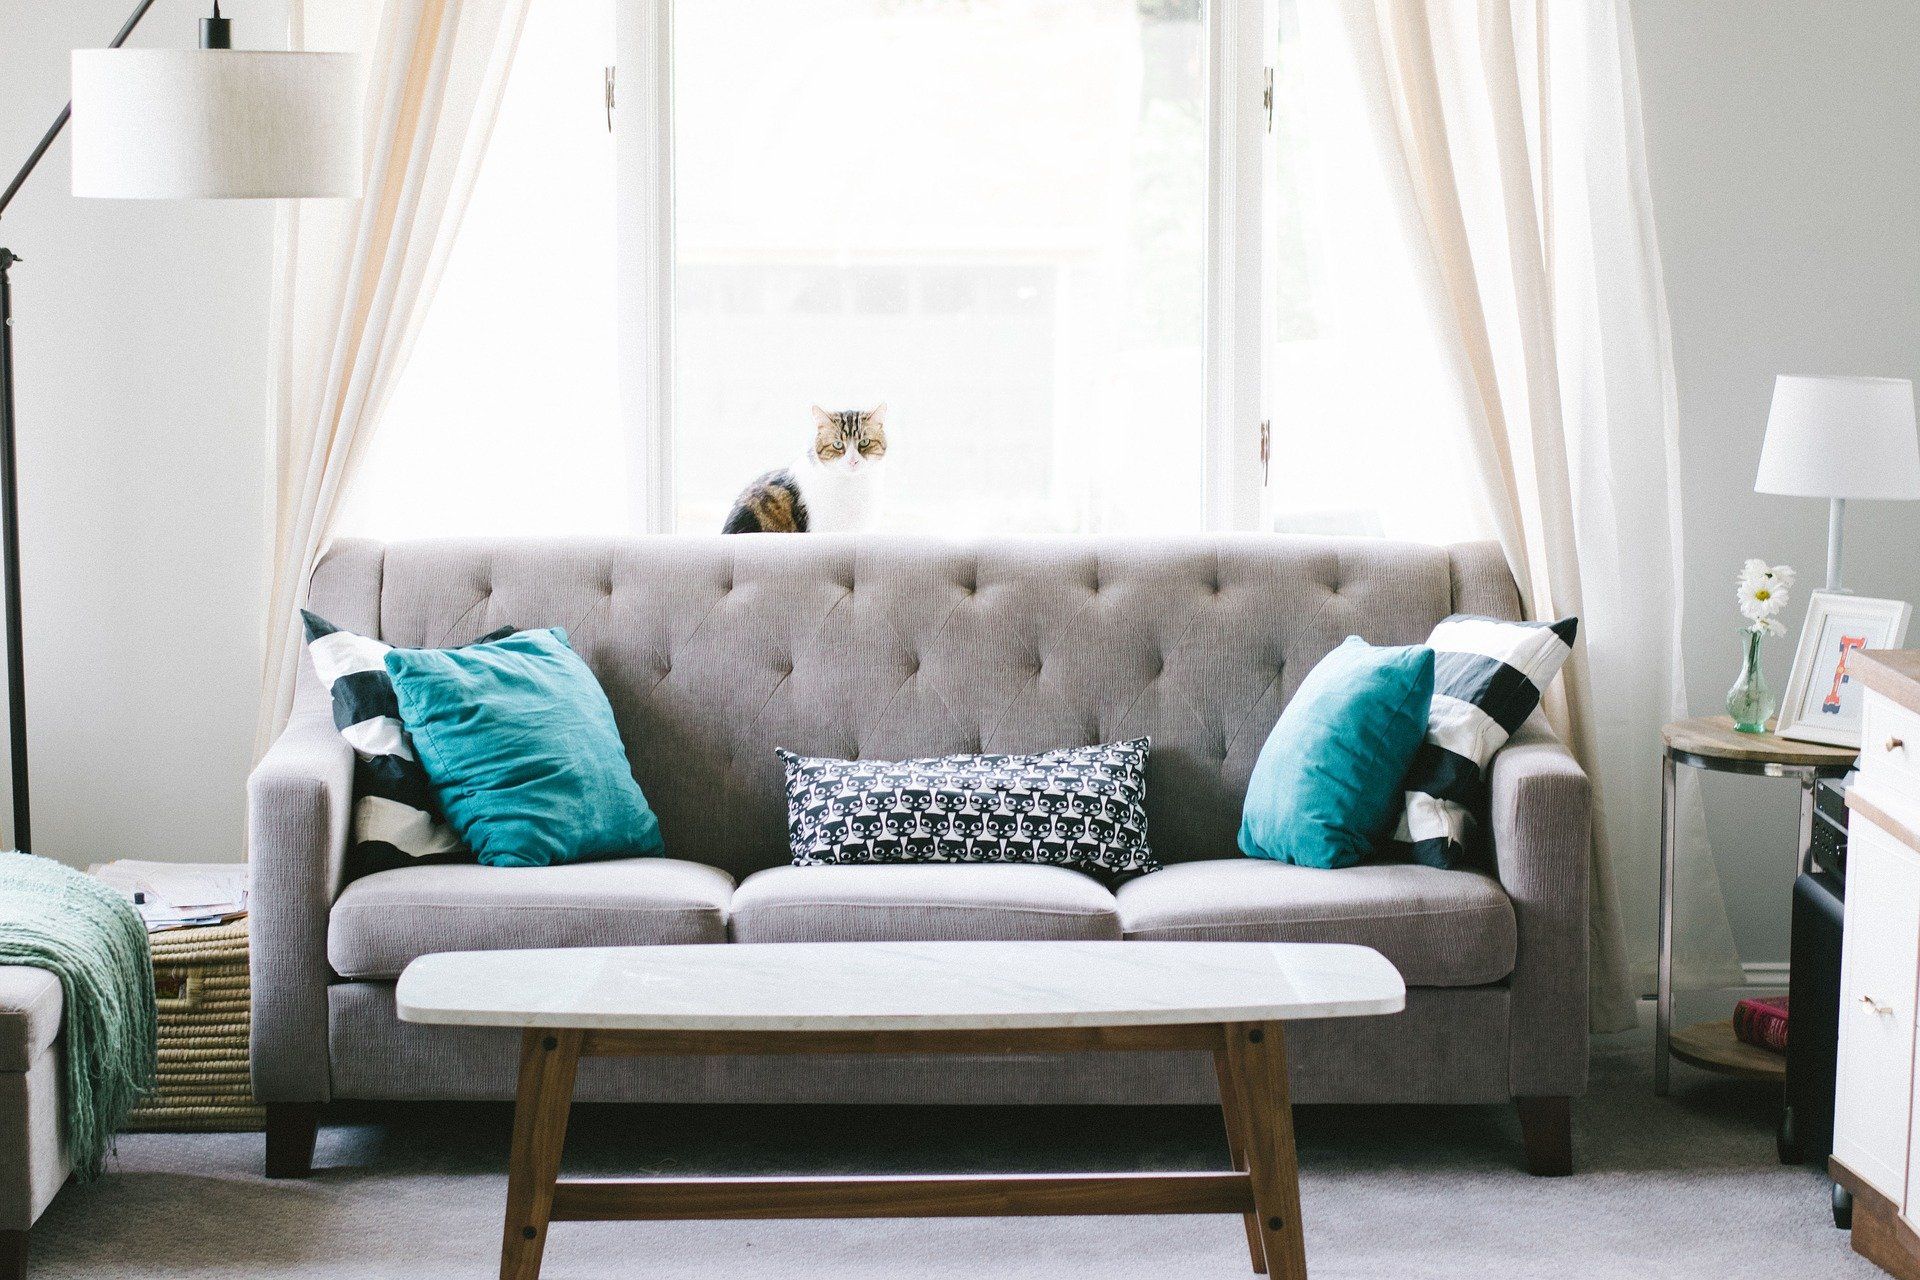 5 Ways to Stop Furniture From Sliding That Don't Suck - RugPadUSA